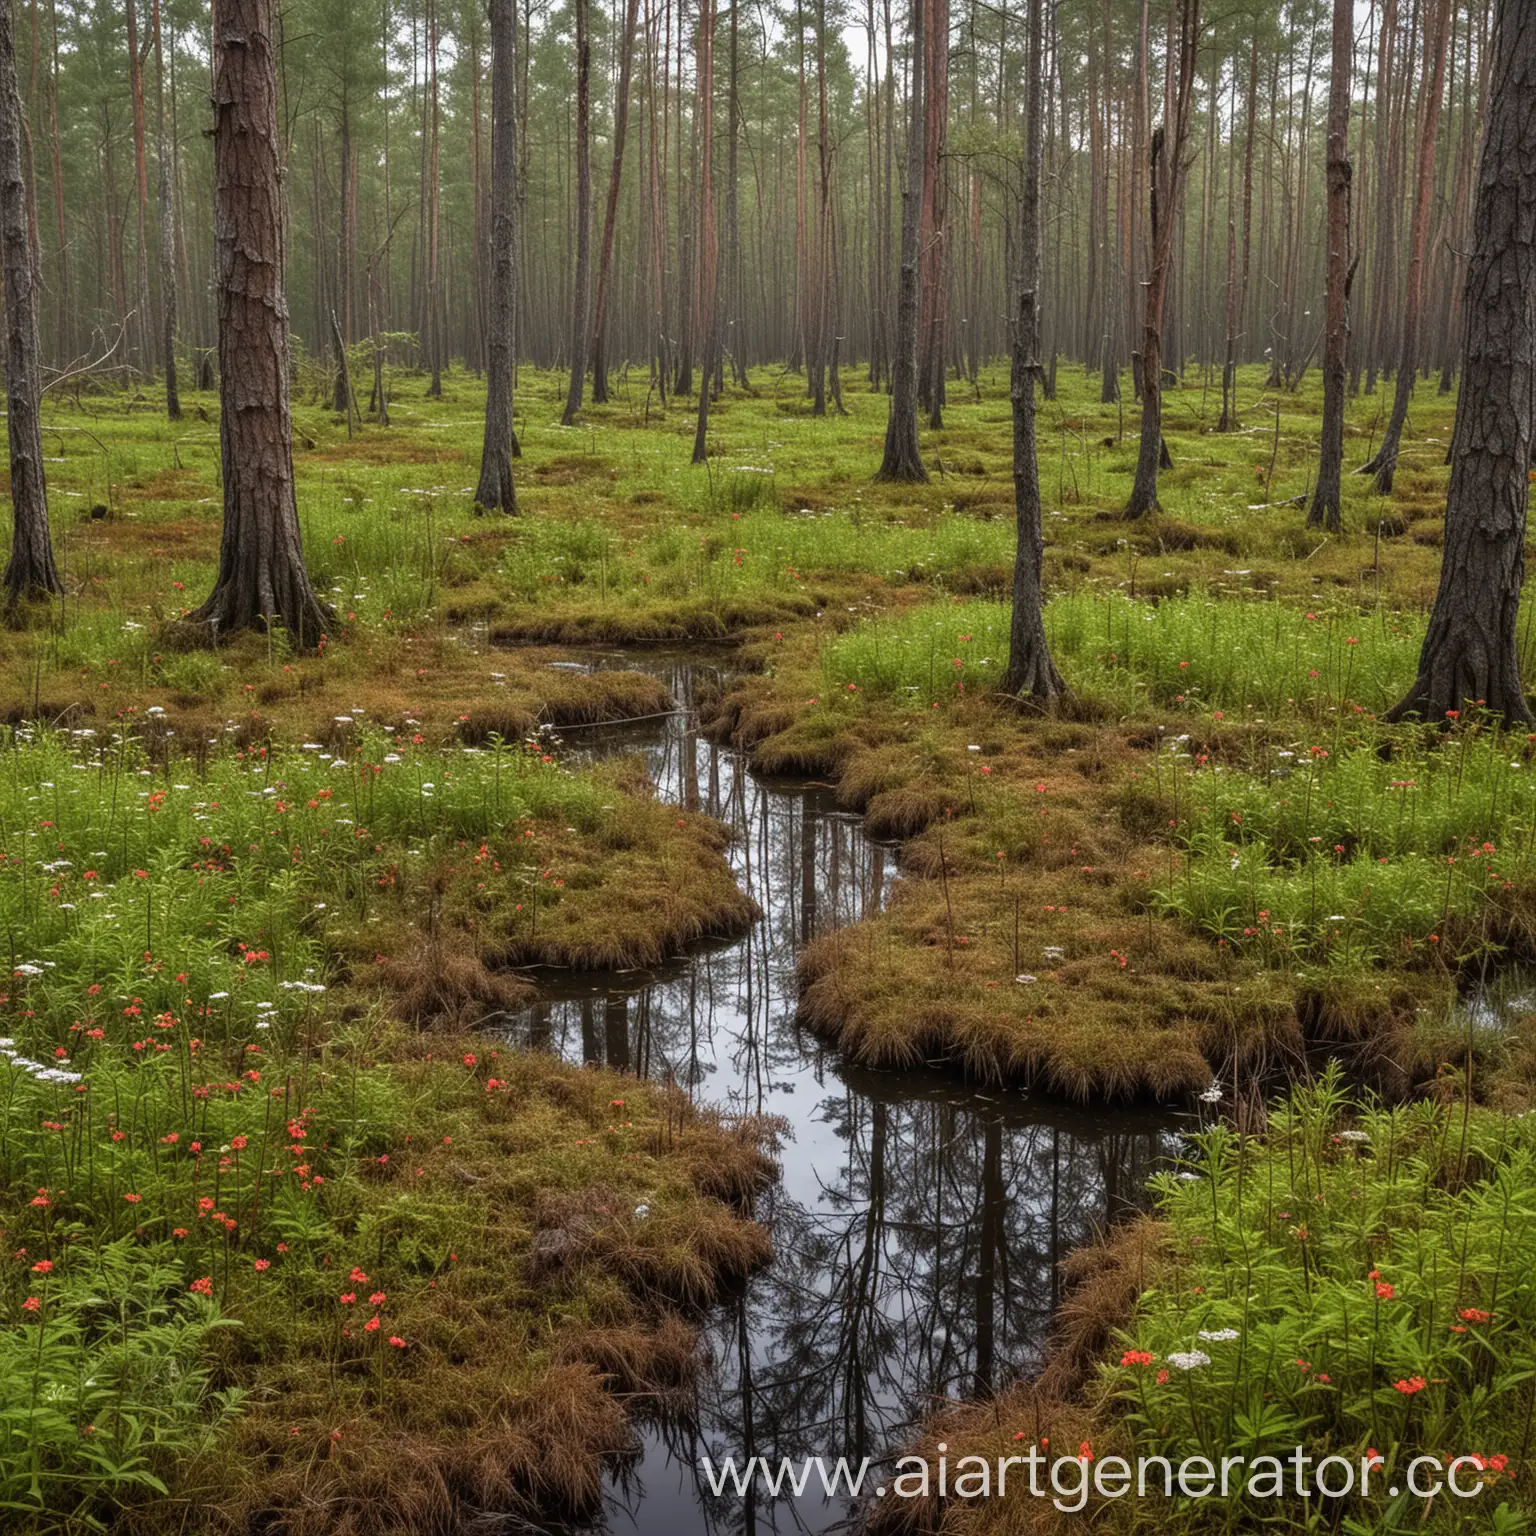 Enchanted-Forest-Swamp-with-Rotten-Trees-and-Overgrown-Flora